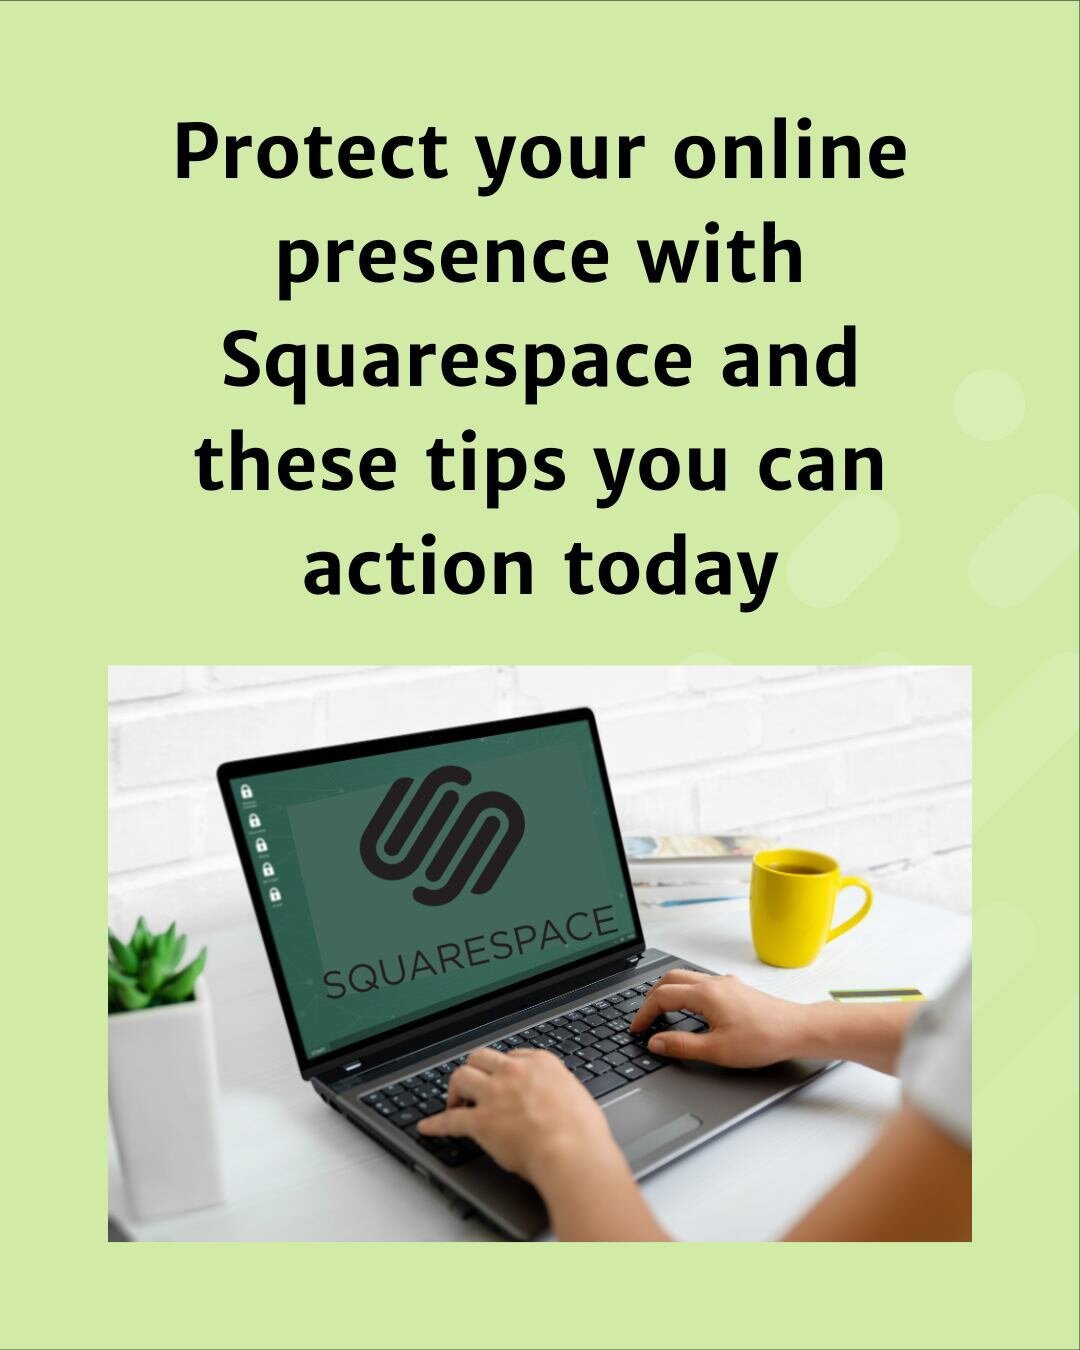 Squarespace is more than just a website - it&rsquo;s your security guard protecting your online presence 💪⁠
⁠
Keep your online presence safe with these security tips, because a strong password is not enough (sadly) to keep you protected online. ⁠
⁠
